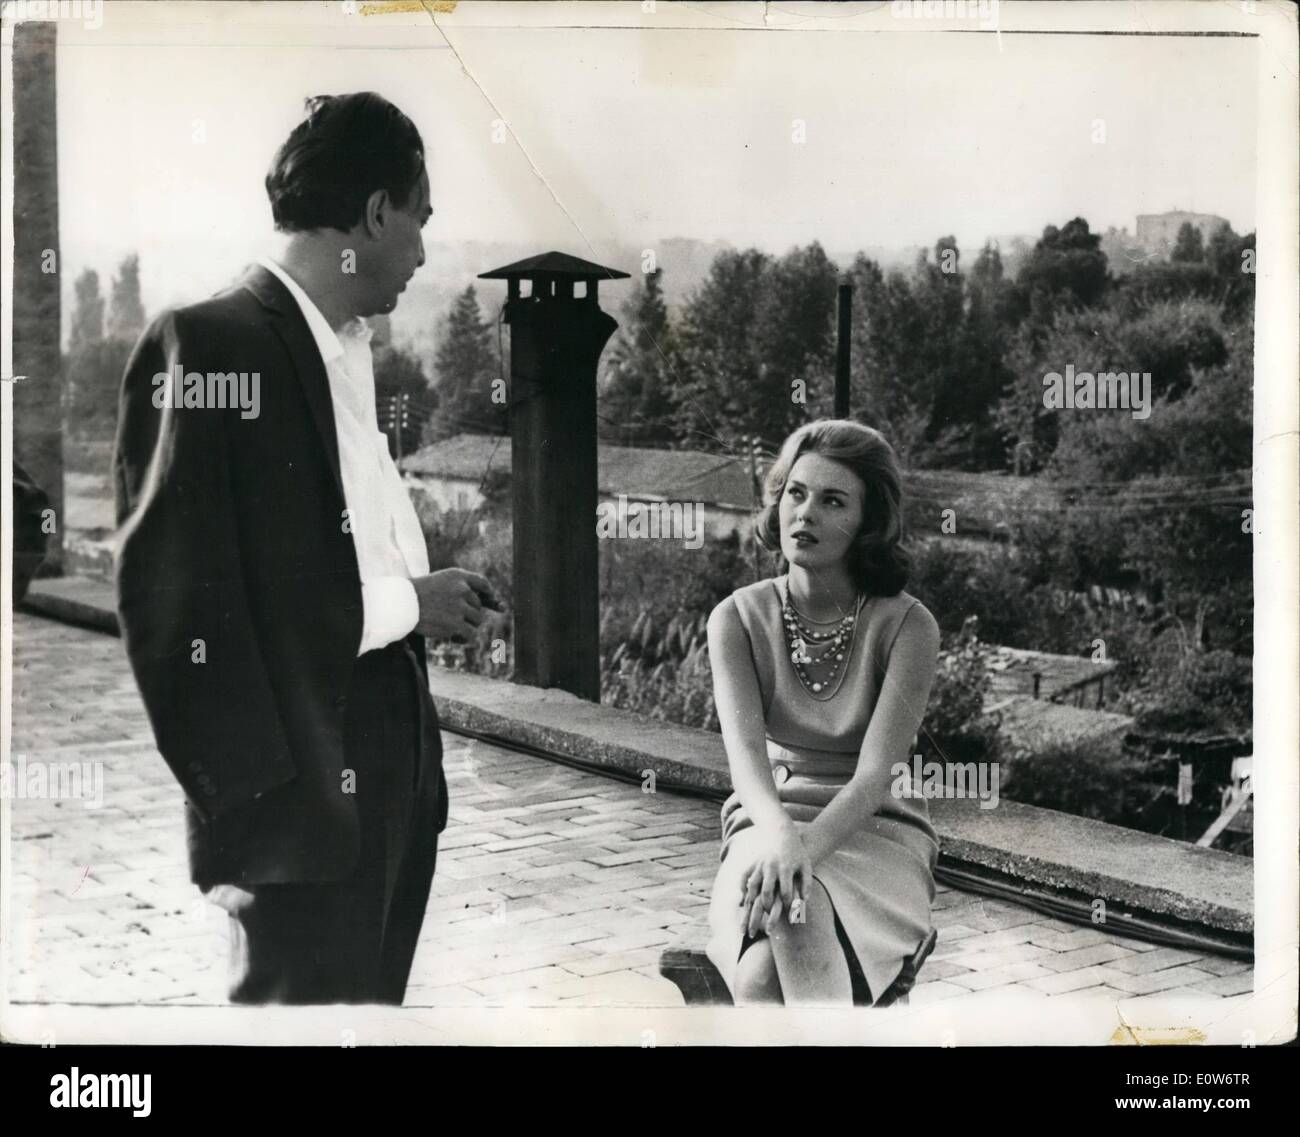 Oct. 10, 1961 - Jean Seberg engaged to many French writer; American actress Jean Seberg of French writer Roman Gary have announced their engagement in Rome. The wedding will be within three weeks. One of Gary's more famous books was ''Roots of the Sky'' Photo Shows Jean Seberg and Roman Gary together at the house where they are both staying as guest in Rome. Stock Photo